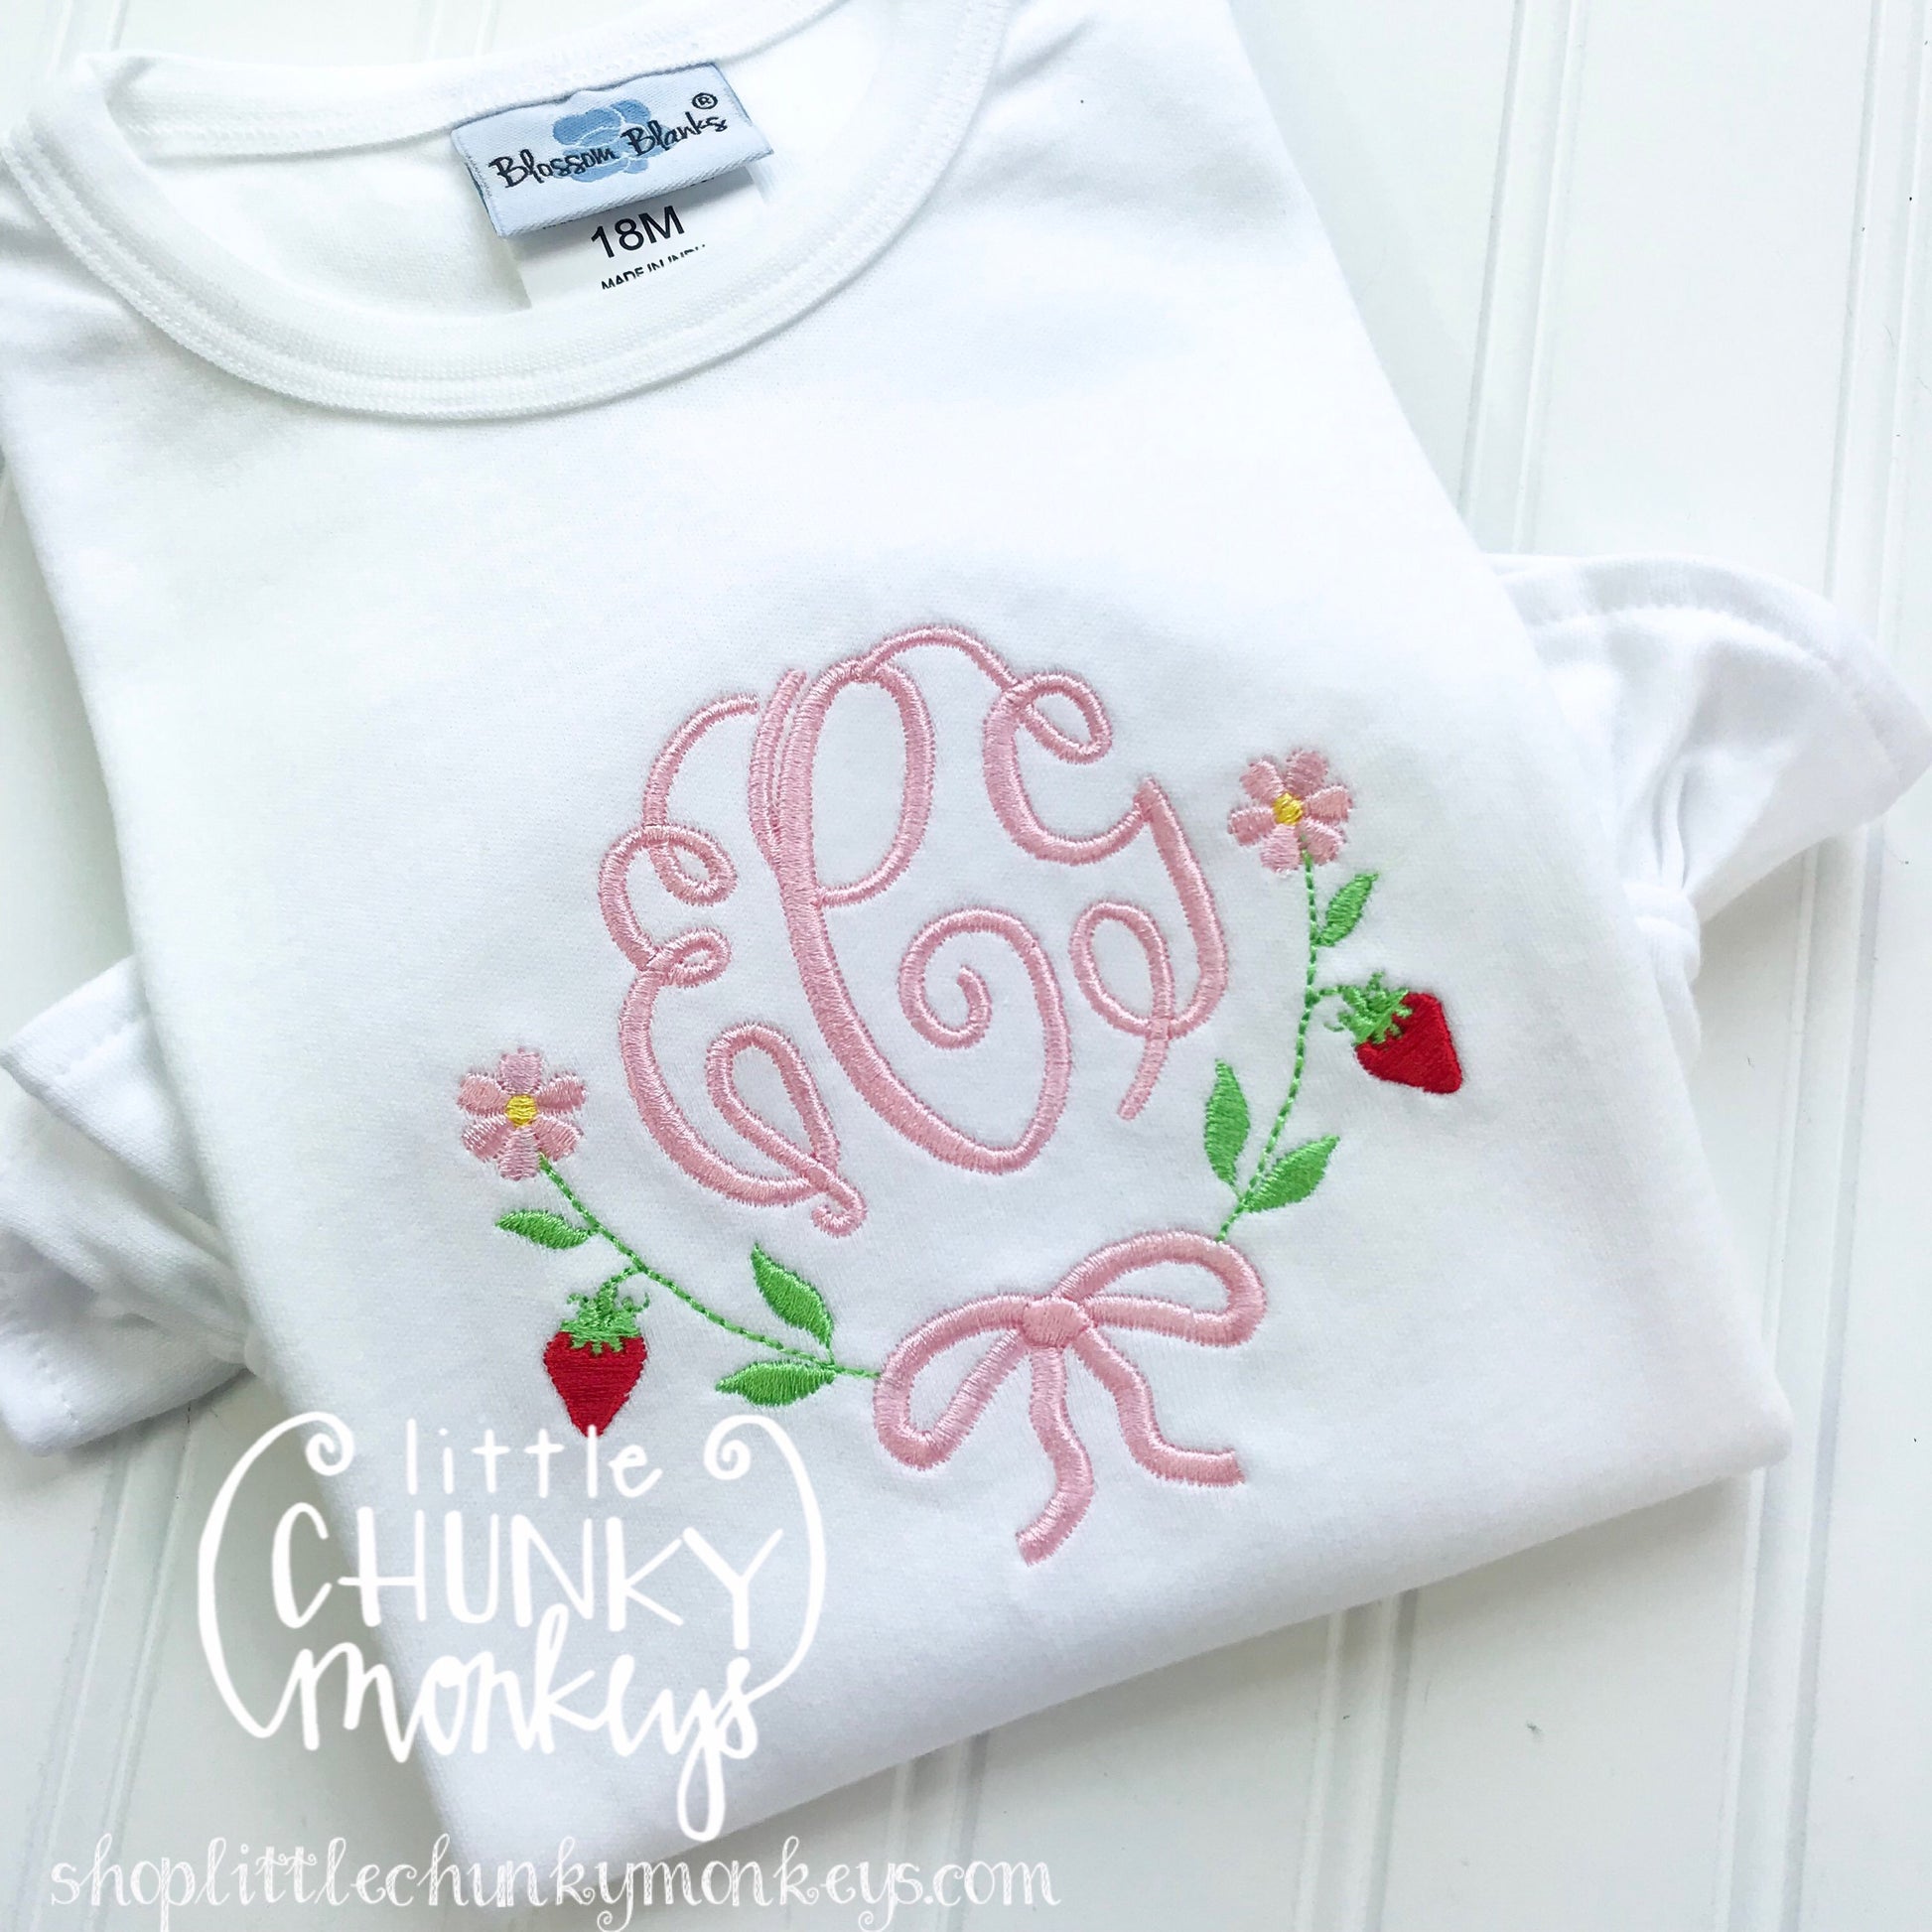 Girl outfit - Girl Shirt - Monogram Tee with Strawberries & Daisies